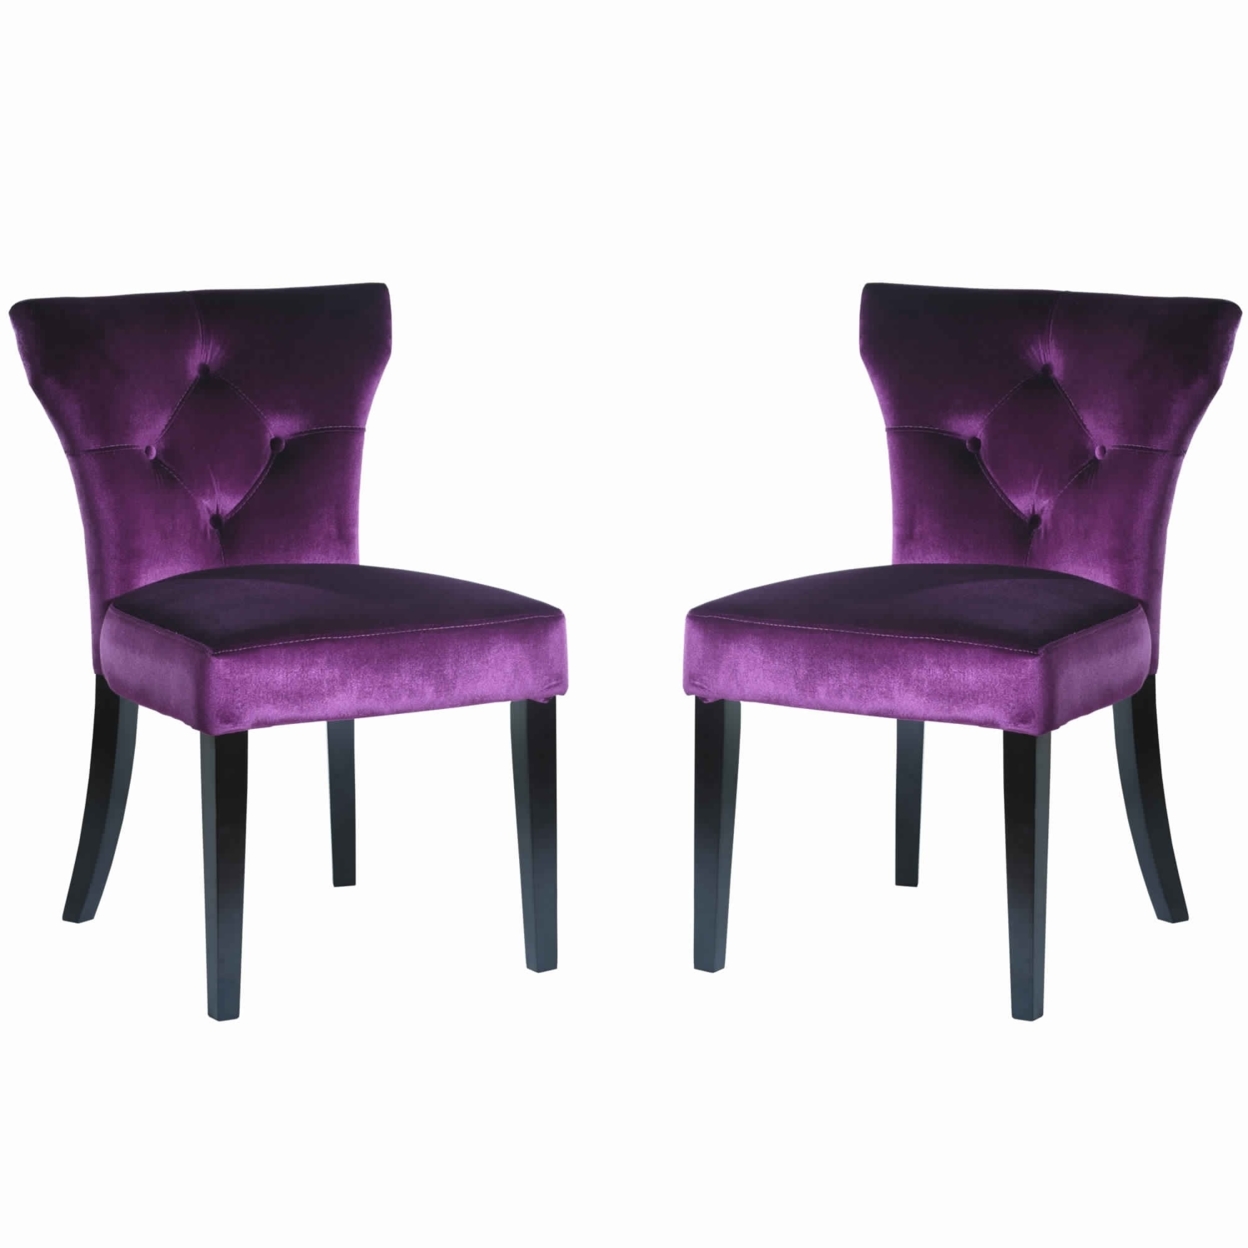 Fabric Side Chair With Button Tufted Back And Padded Seat, Set Of 2, Purple- Saltoro Sherpi